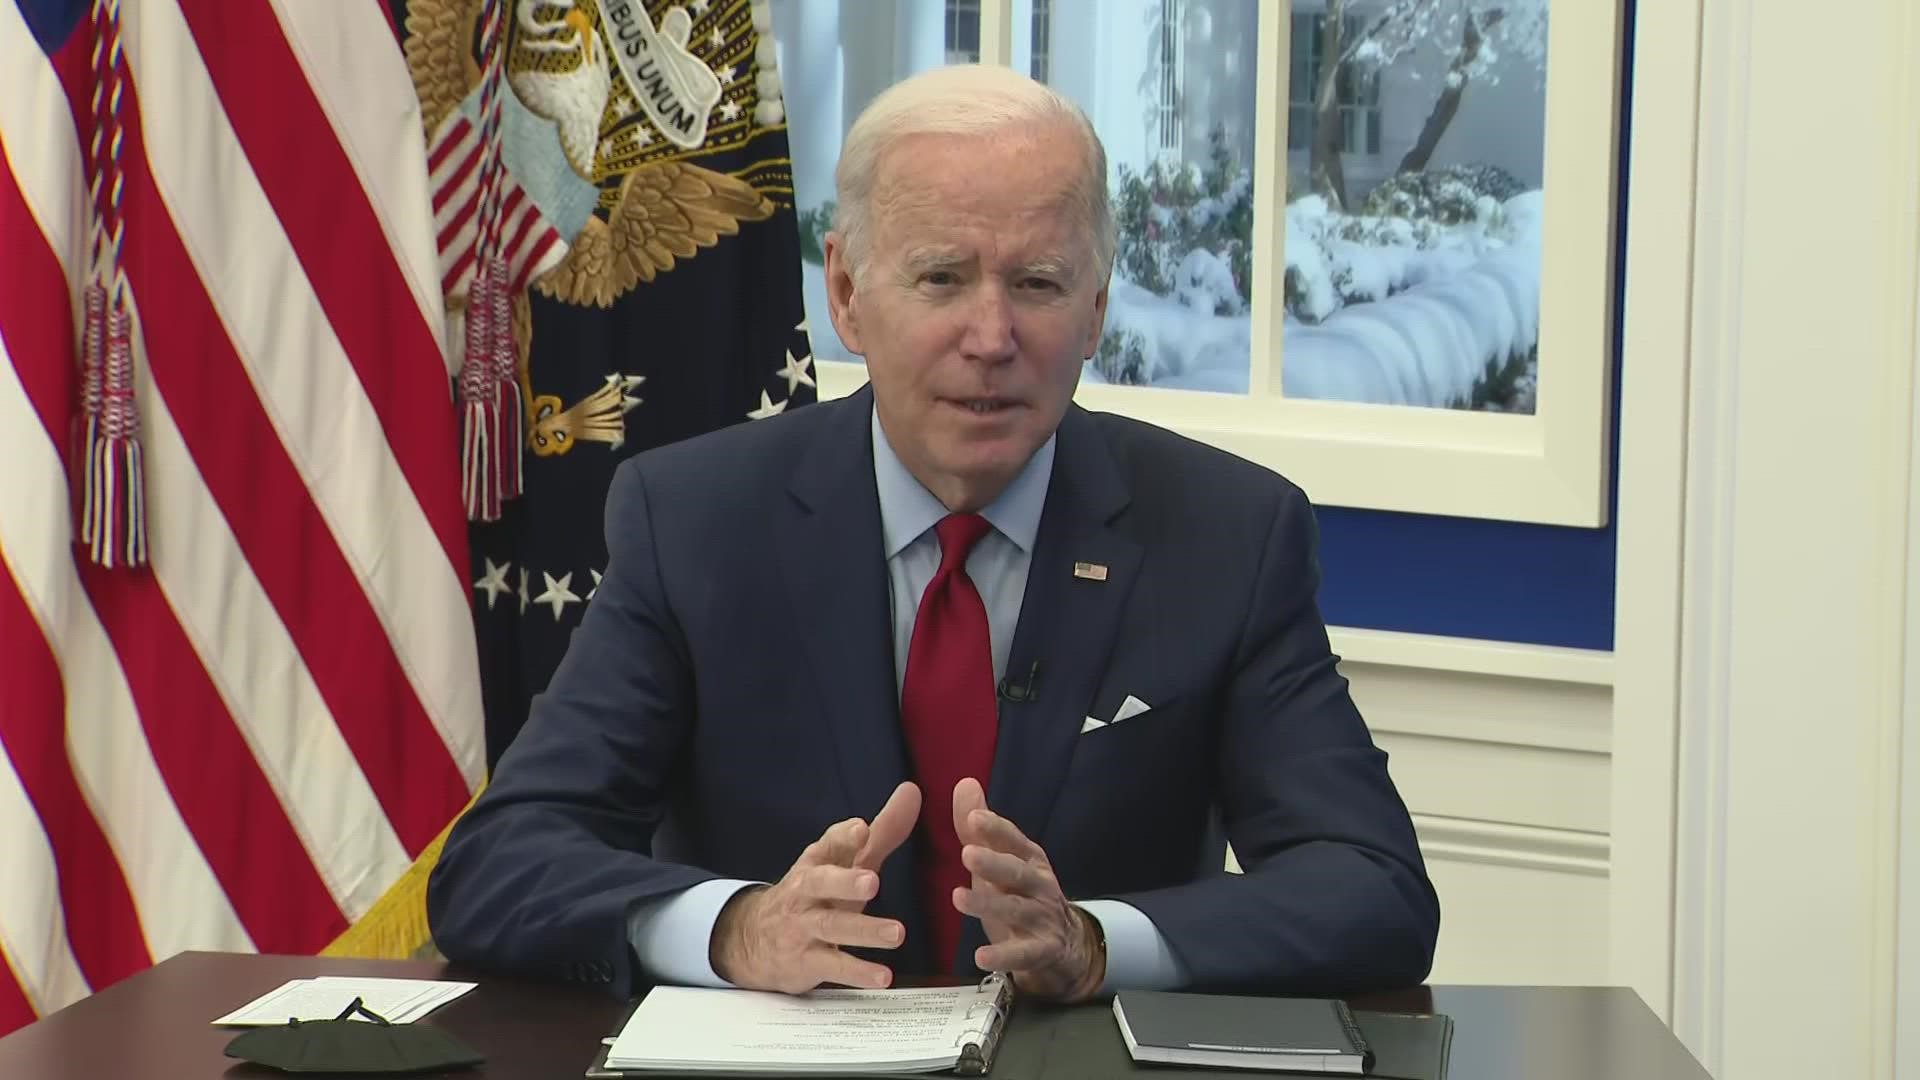 President Joe Biden discussed the latest developments Tuesday surrounding the omicron COVID-19 variant amid a surge in cases.